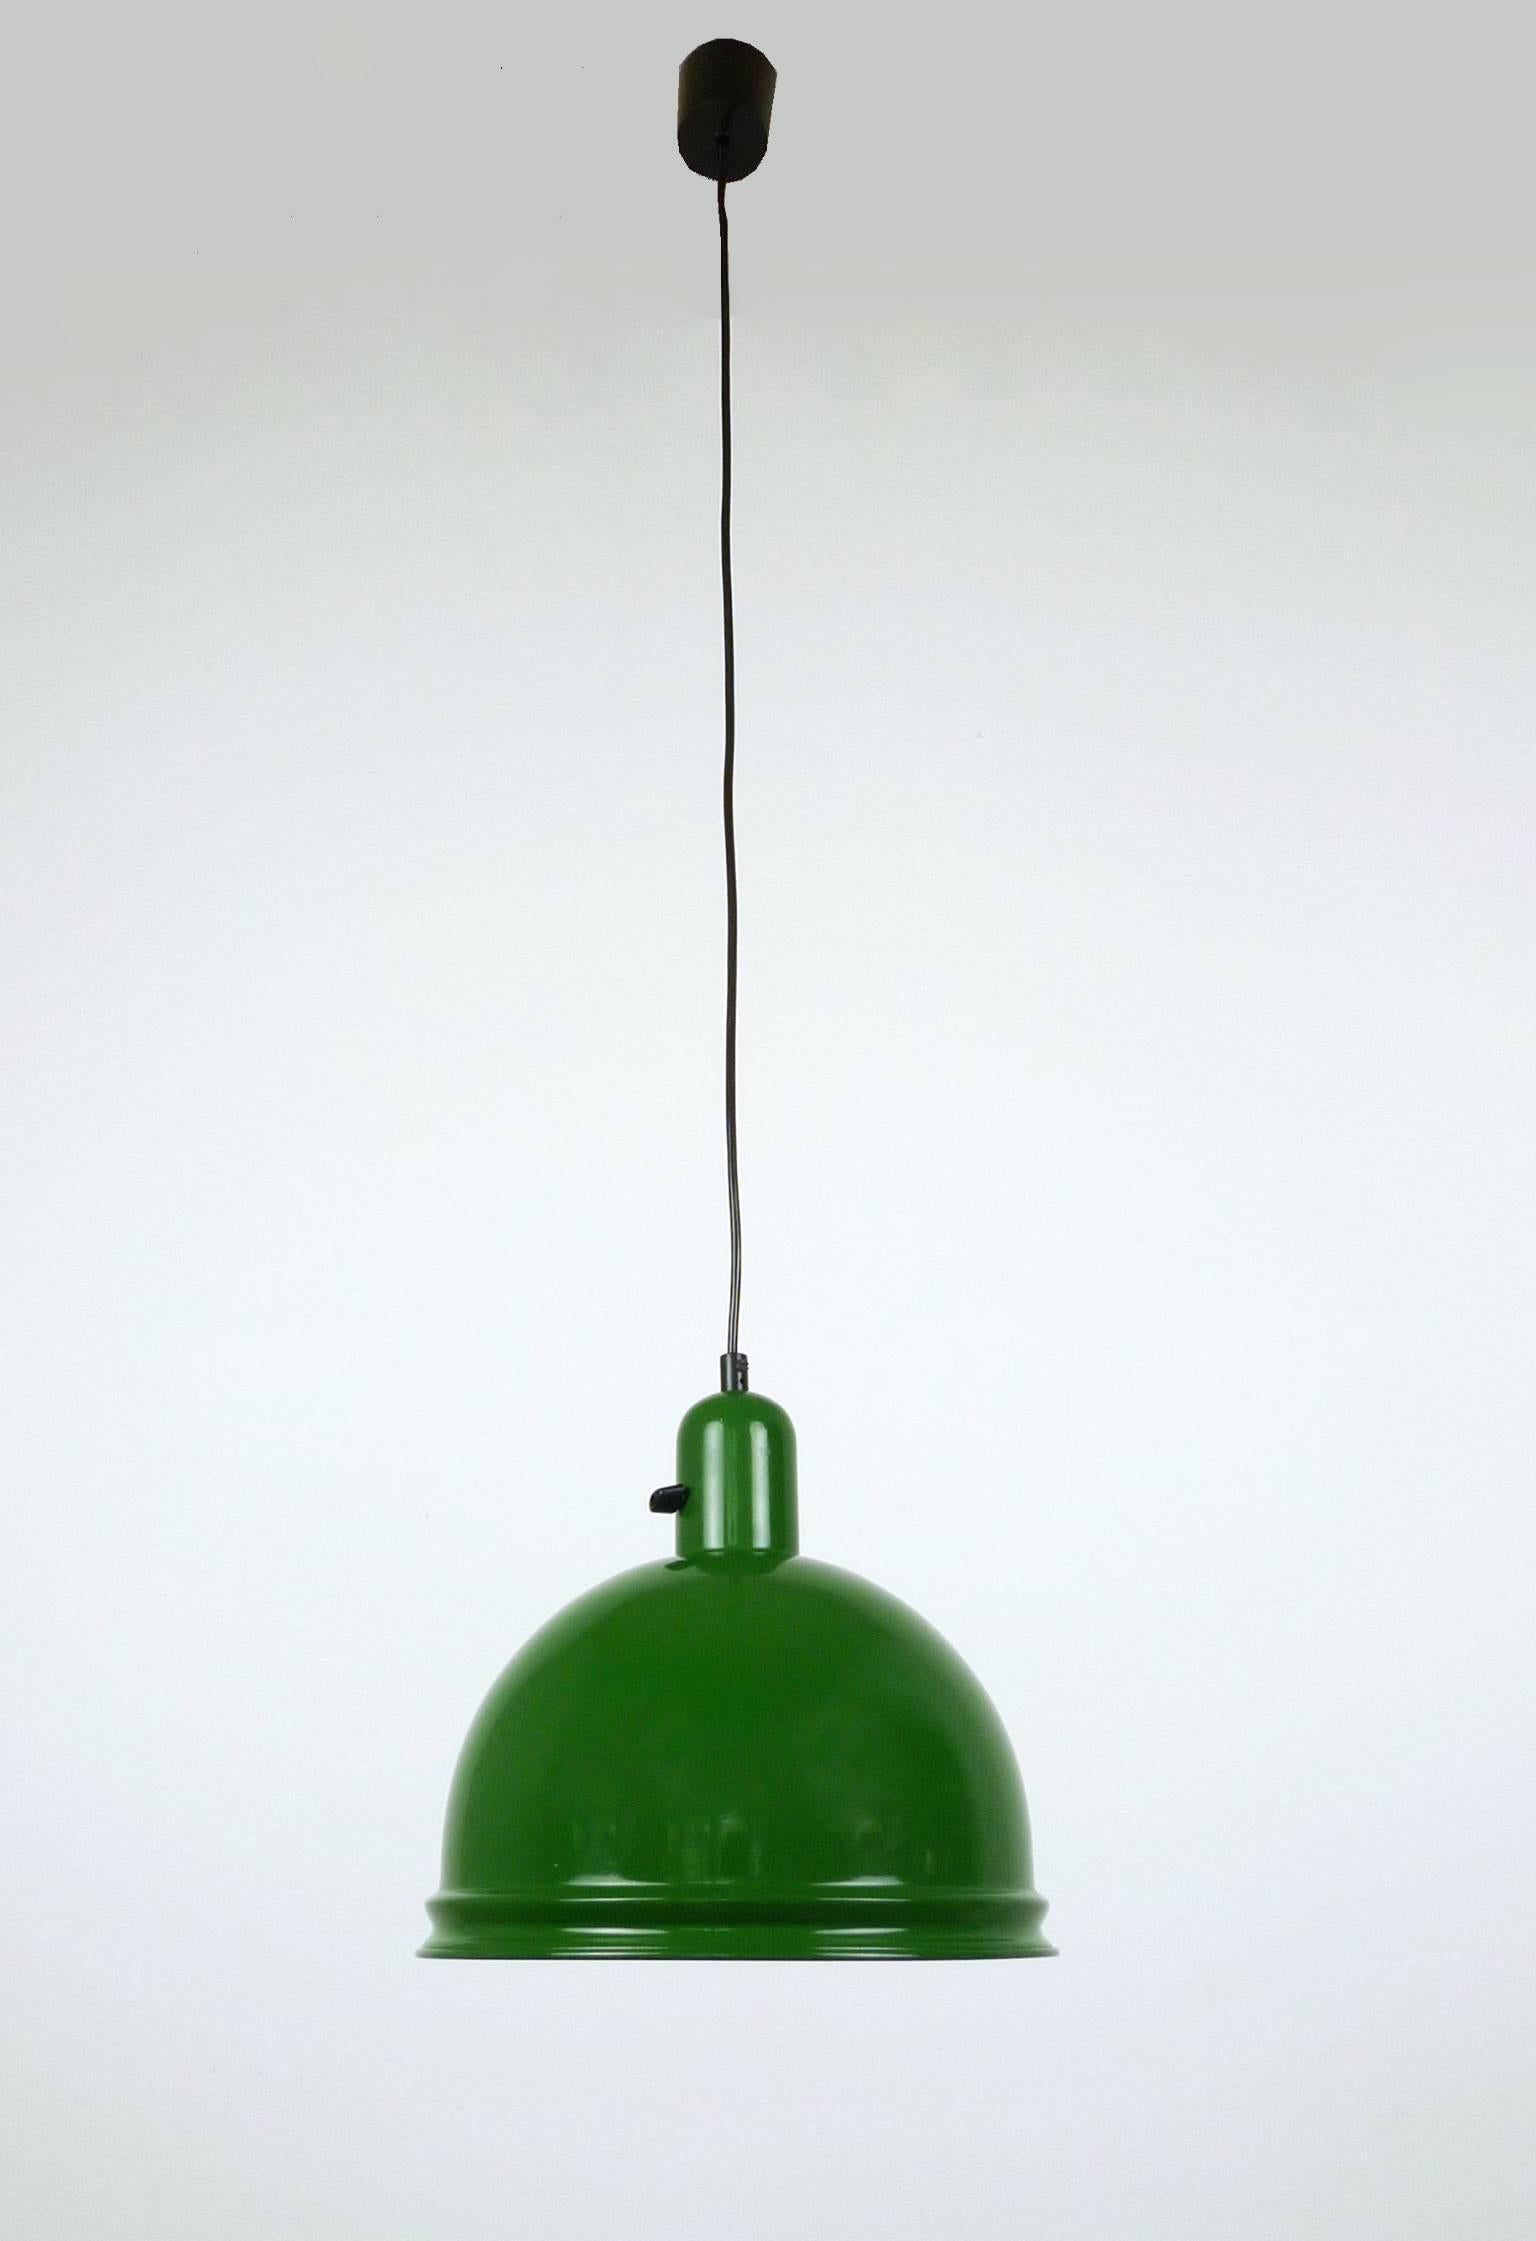 This green Industrial light with a metal reflector and a rotary switch from the 1950s remains in a very good original condition.